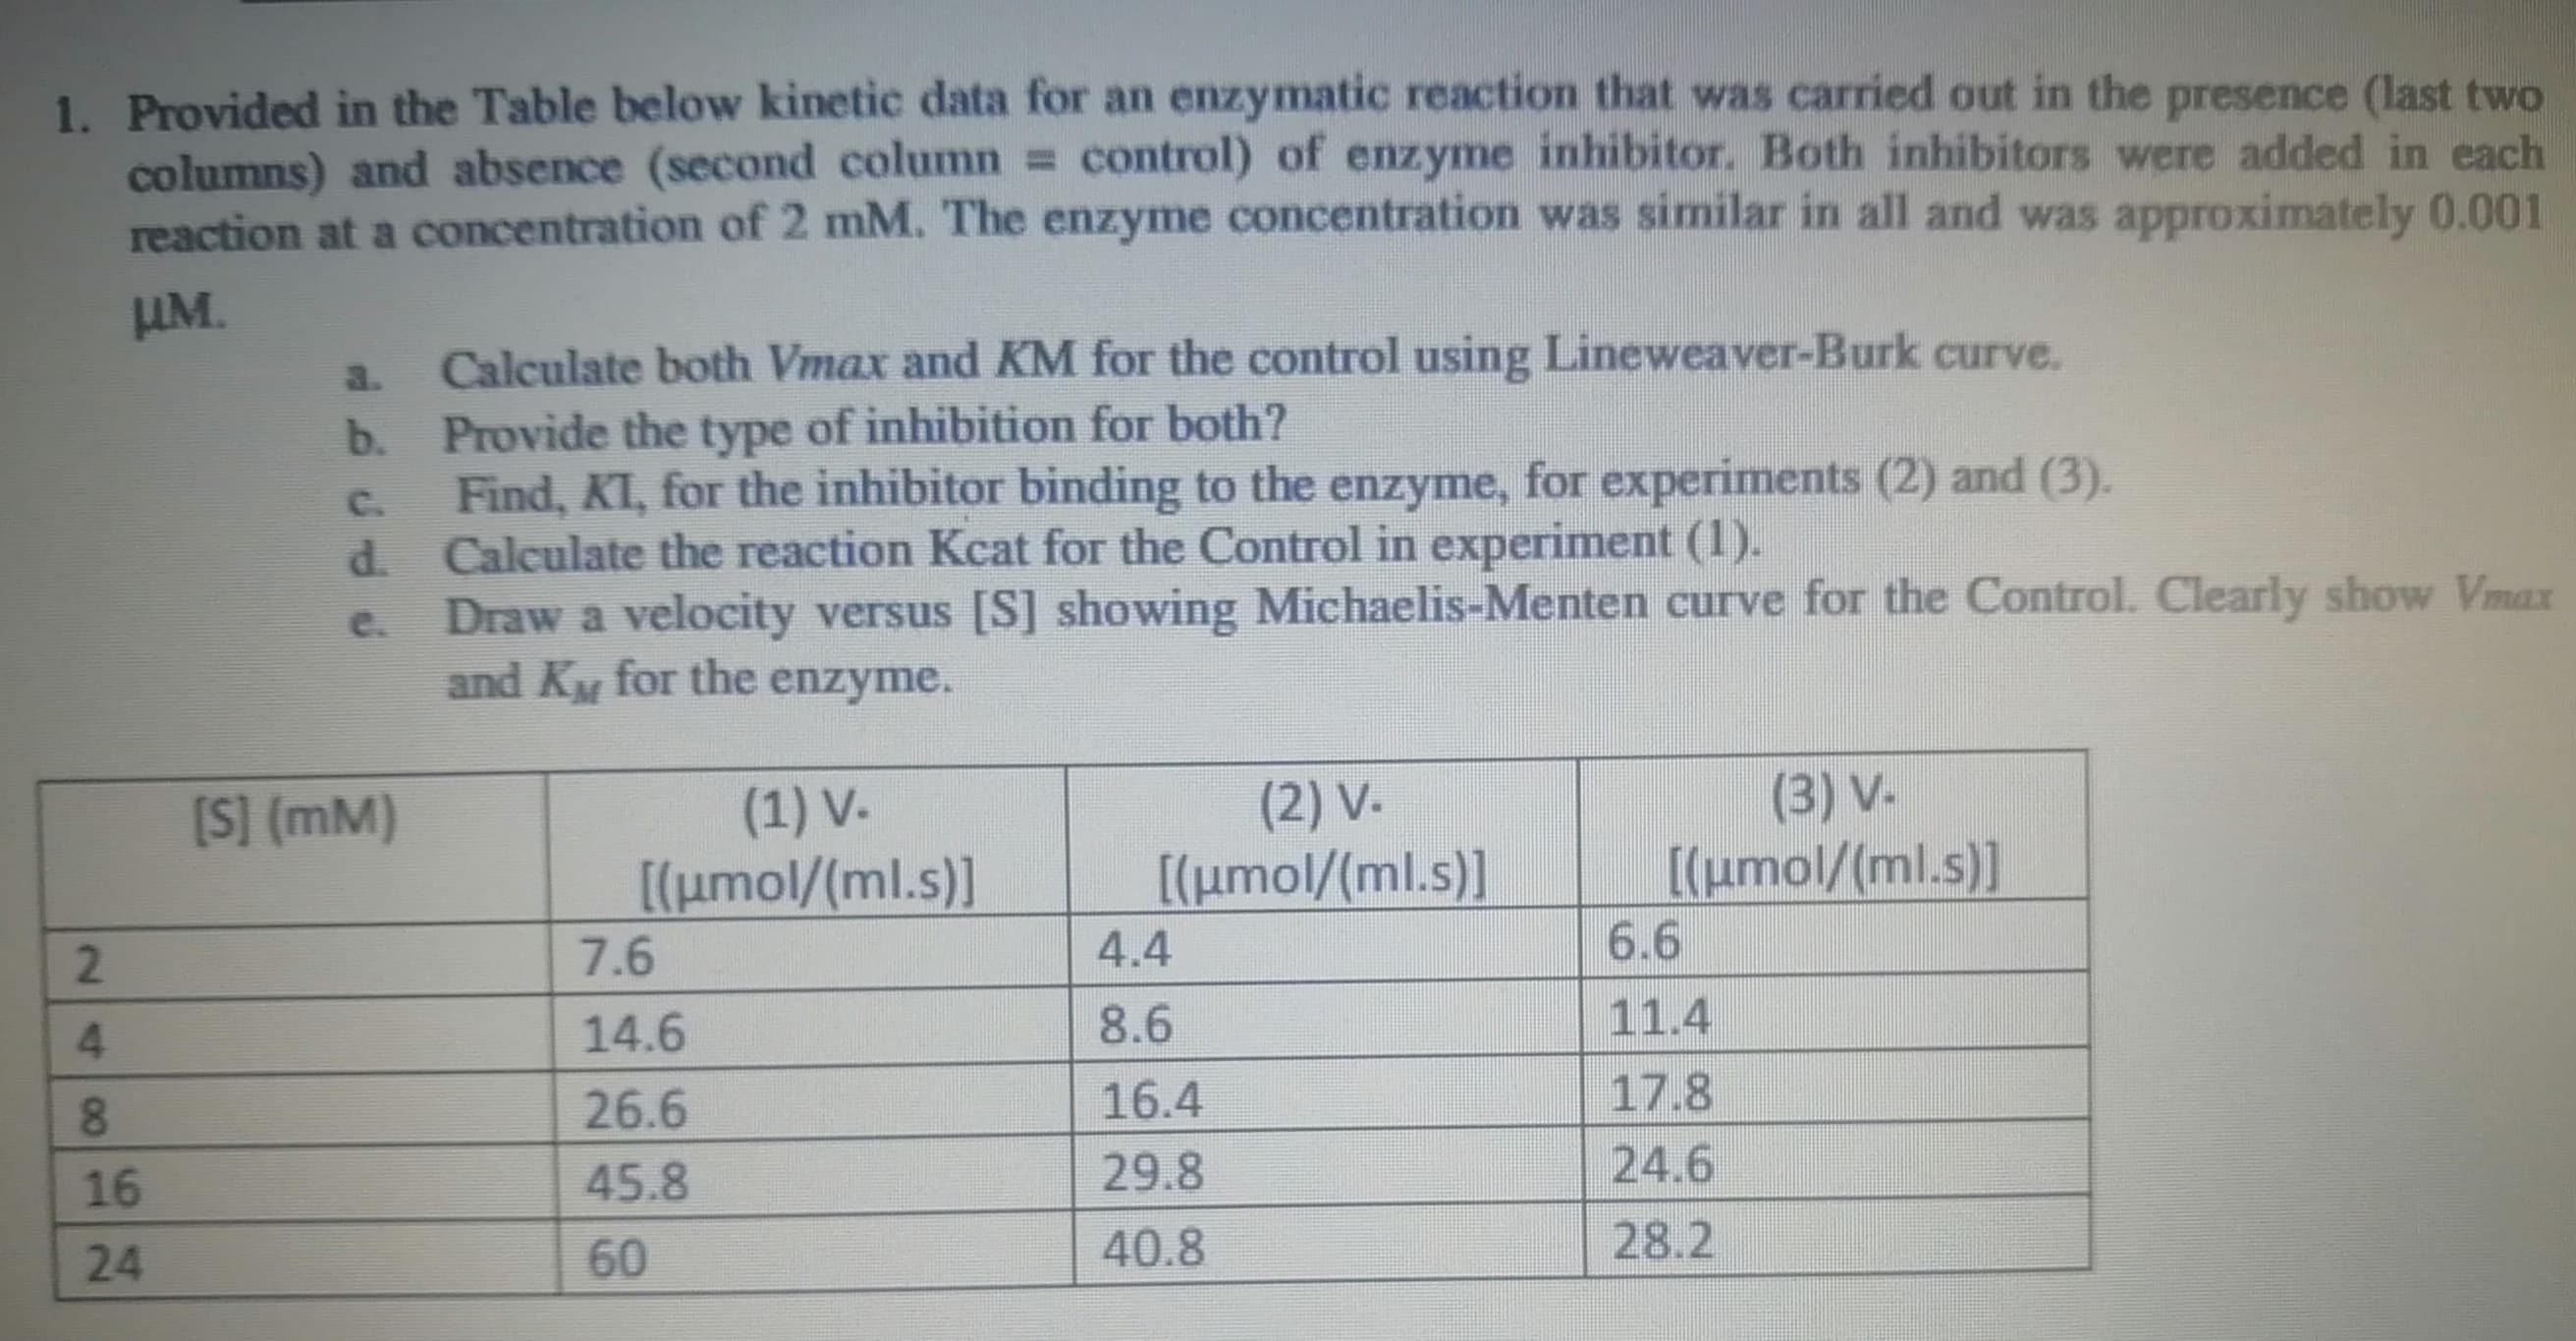 1. Provided in the Table below kinetic data for an enzymatic reaction that was carried out in the presence (last two
columns) and absence (second column control) of enzyme inhibitor. Both inhibitors were added in each
reaction at a concentration of 2 mM. The enzyme concentration was similar in all and was approximately 0.001
Им.
a.
Calculate both Vmax and KM for the control using Lineweaver-Burk curve.
b. Provide the type of inhibition for both?
Find, KT, for the inhibitor binding to the enzyme, for experiments (2) and (3).
Calculate the reaction Kcat for the Control in experiment (1).
Draw a velocity versus [S] showing Michaelis-Menten curve for the Control. Clearly show Vmaxr
and Ky for the enzyme.
C.
d.
C.
(2) V-
[(umol/(ml.s)]
(3) V-
[(umol/(ml.s)]
6.6
[S] (mM)
(1) V-
[(umol/(ml.s)]
7.6
4.4
14.6
8.6
11.4
8.
26.6
16.4
17.8
16
45.8
29.8
24.6
24
60
40.8
28.2
24
